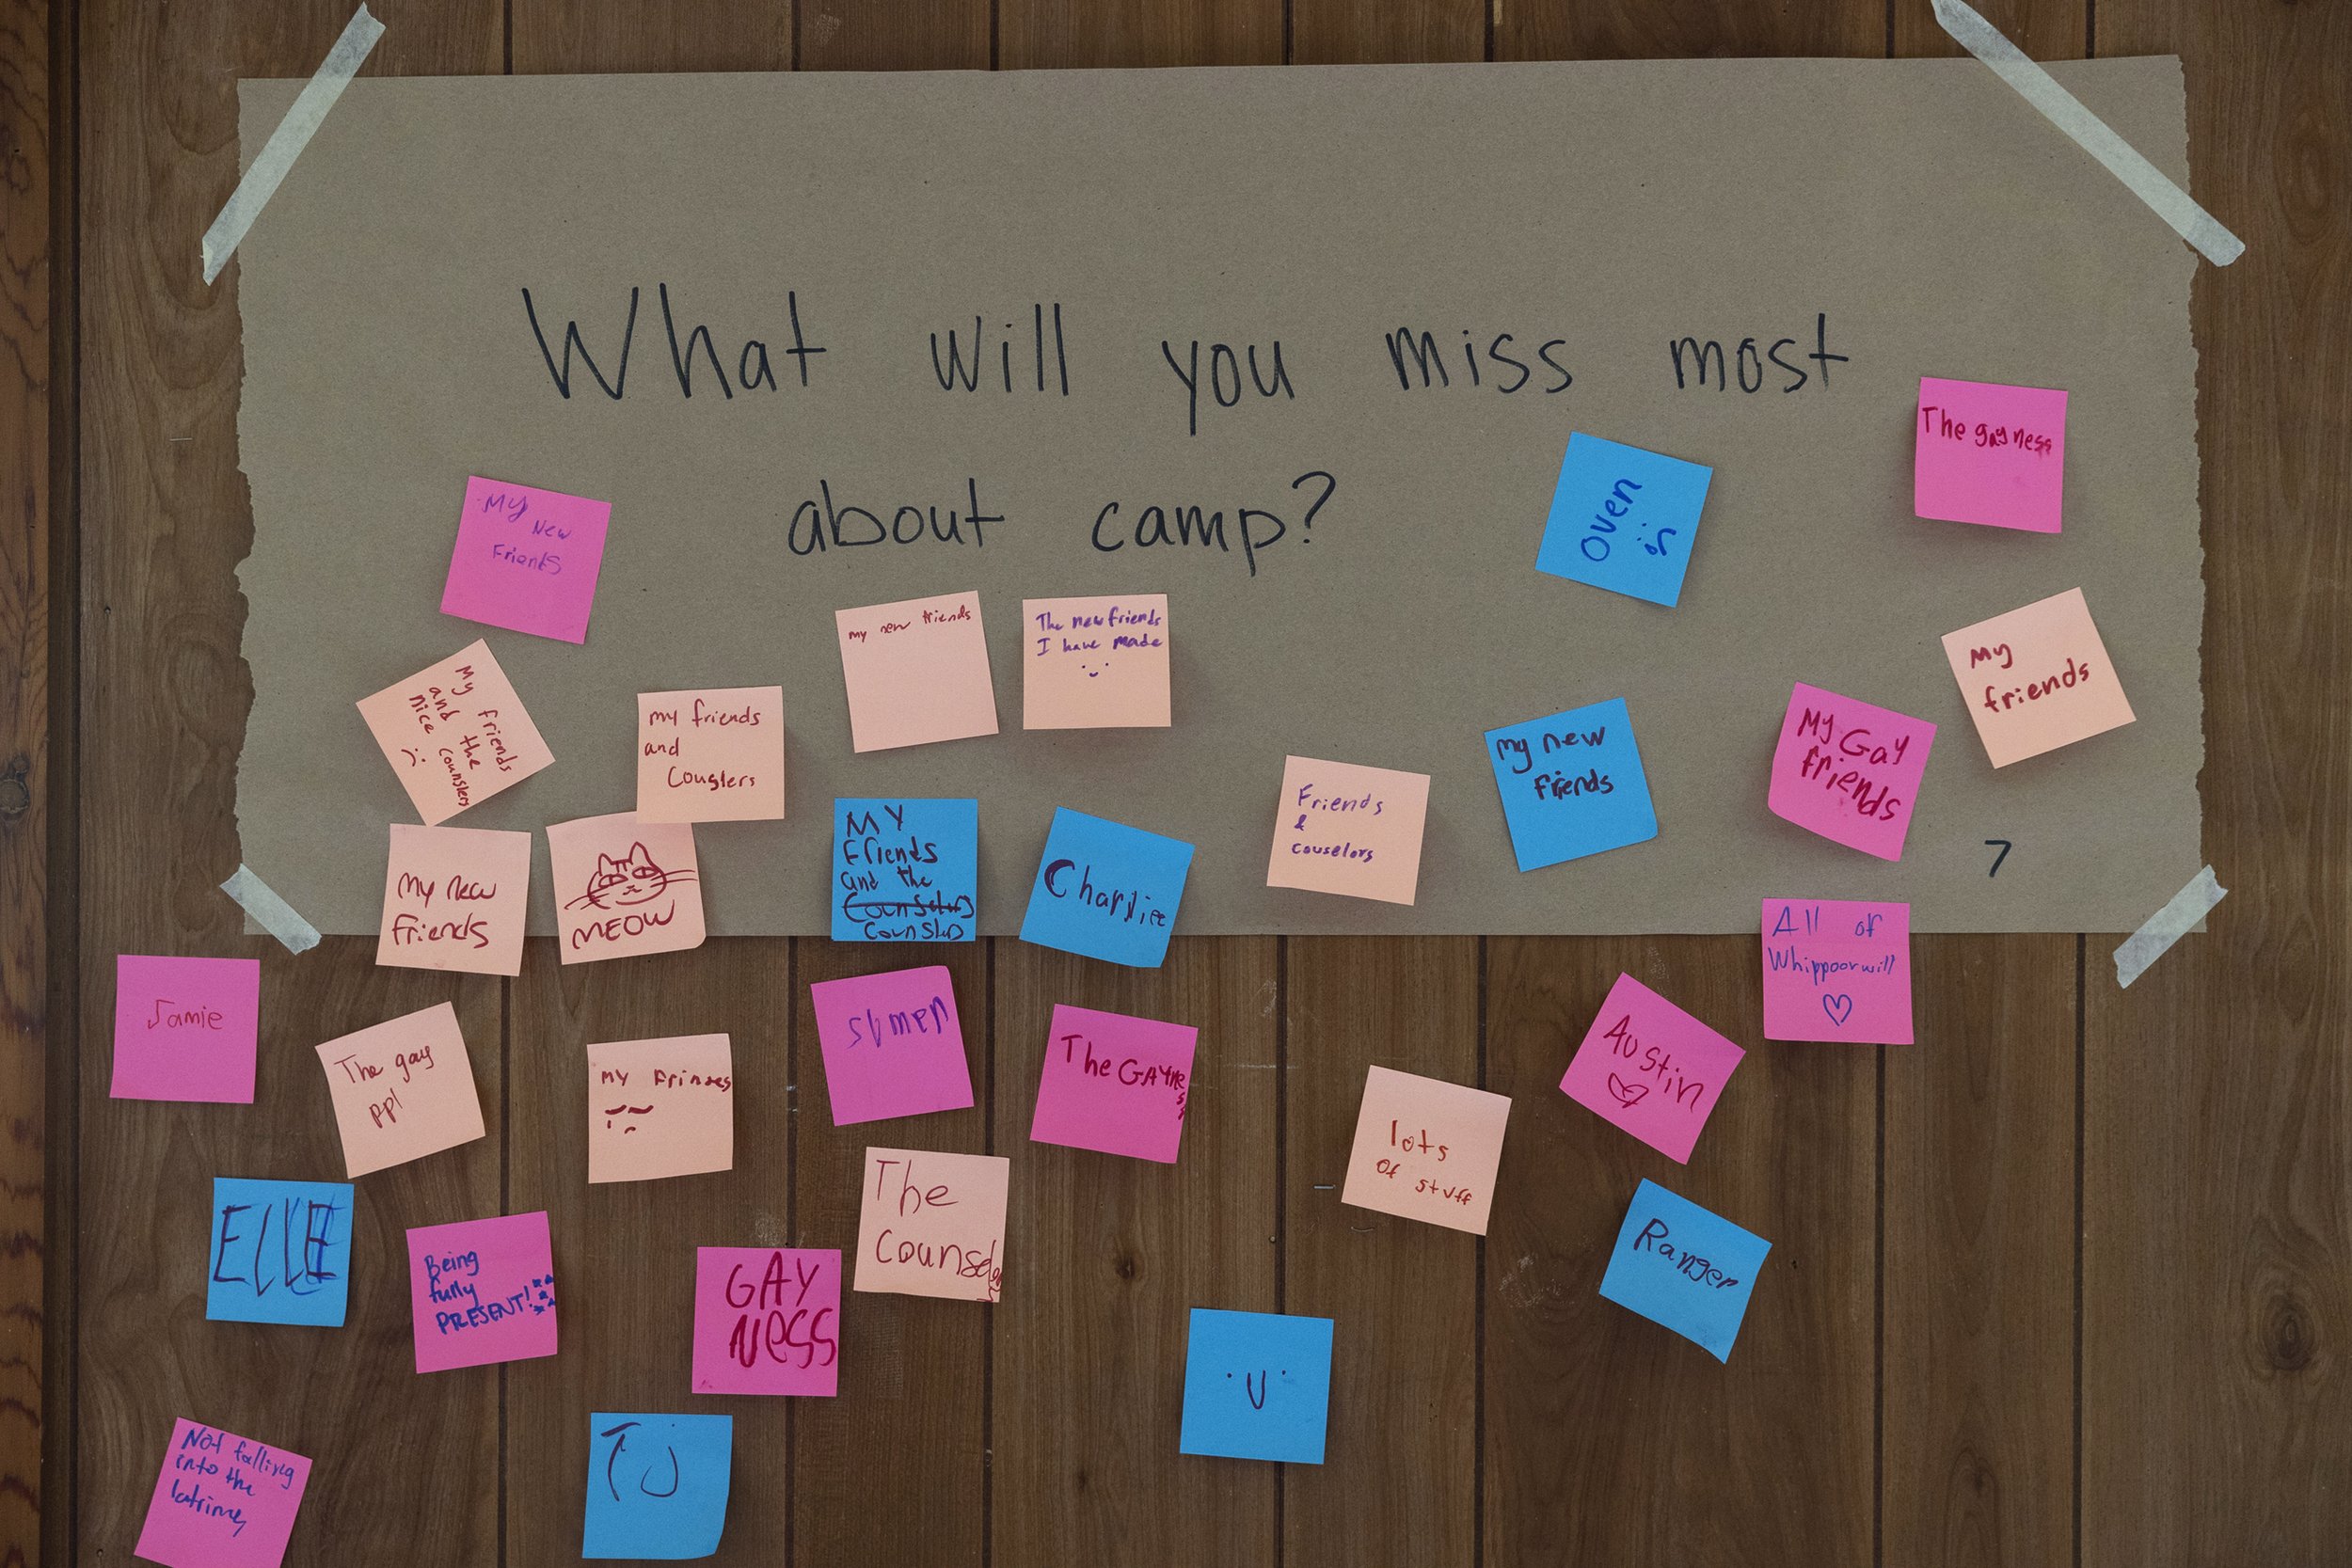   Campers post answers to the question, “What will you miss most about camp?” One camper answered: “Not having to wonder if people around you will accept you.” 